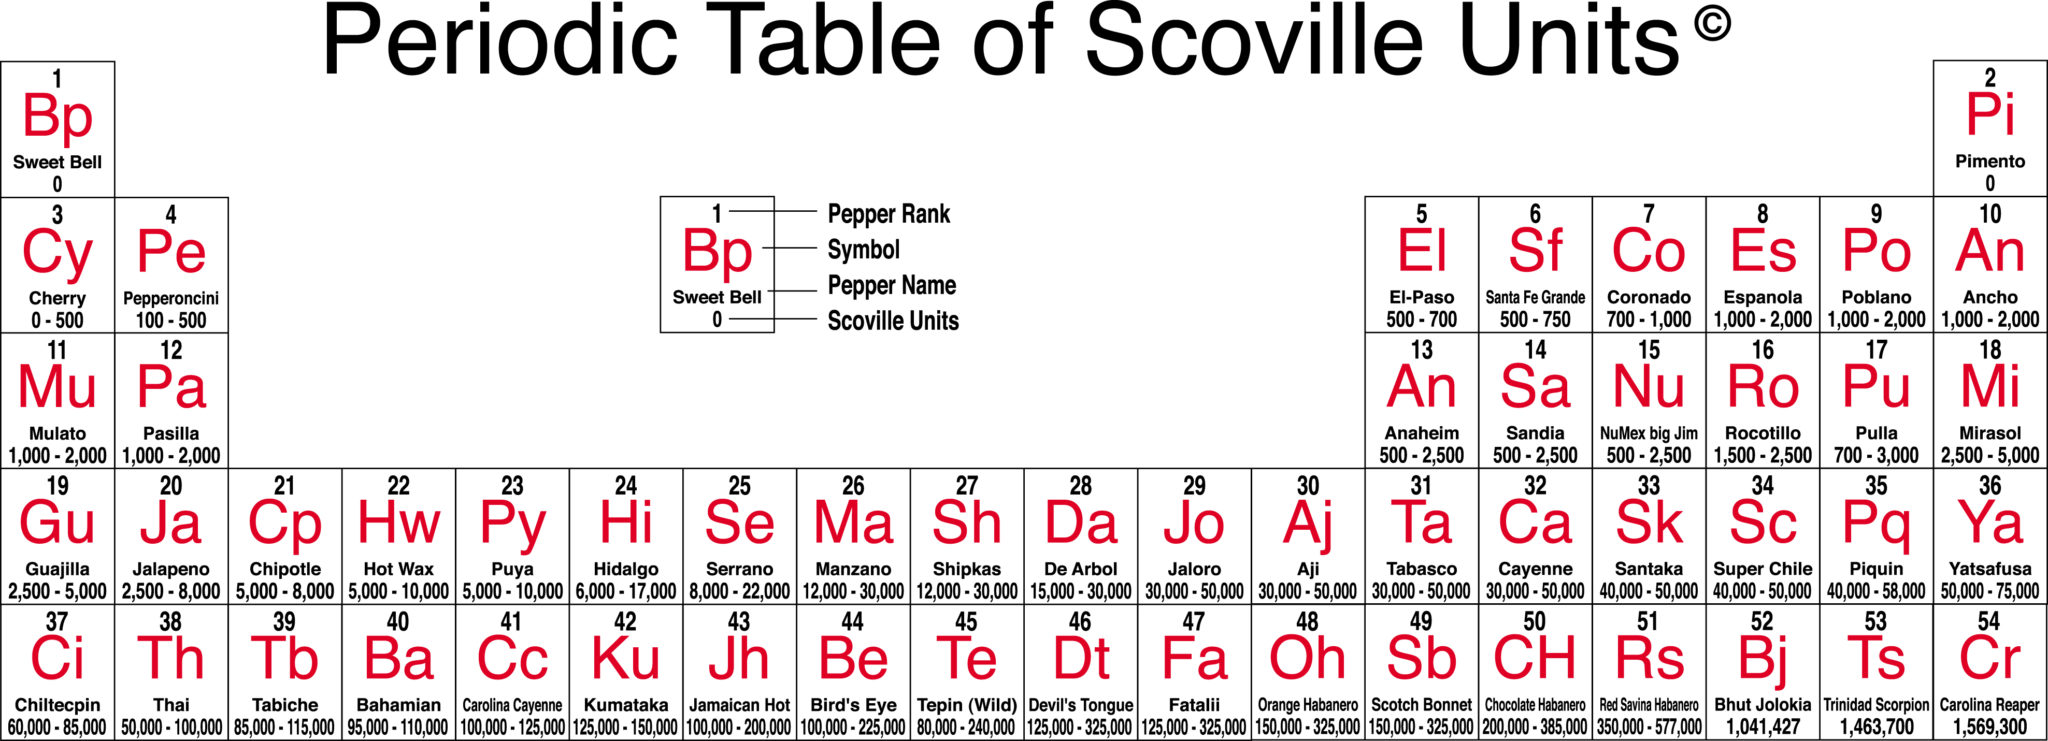 Periodic Table of Scoville Units.